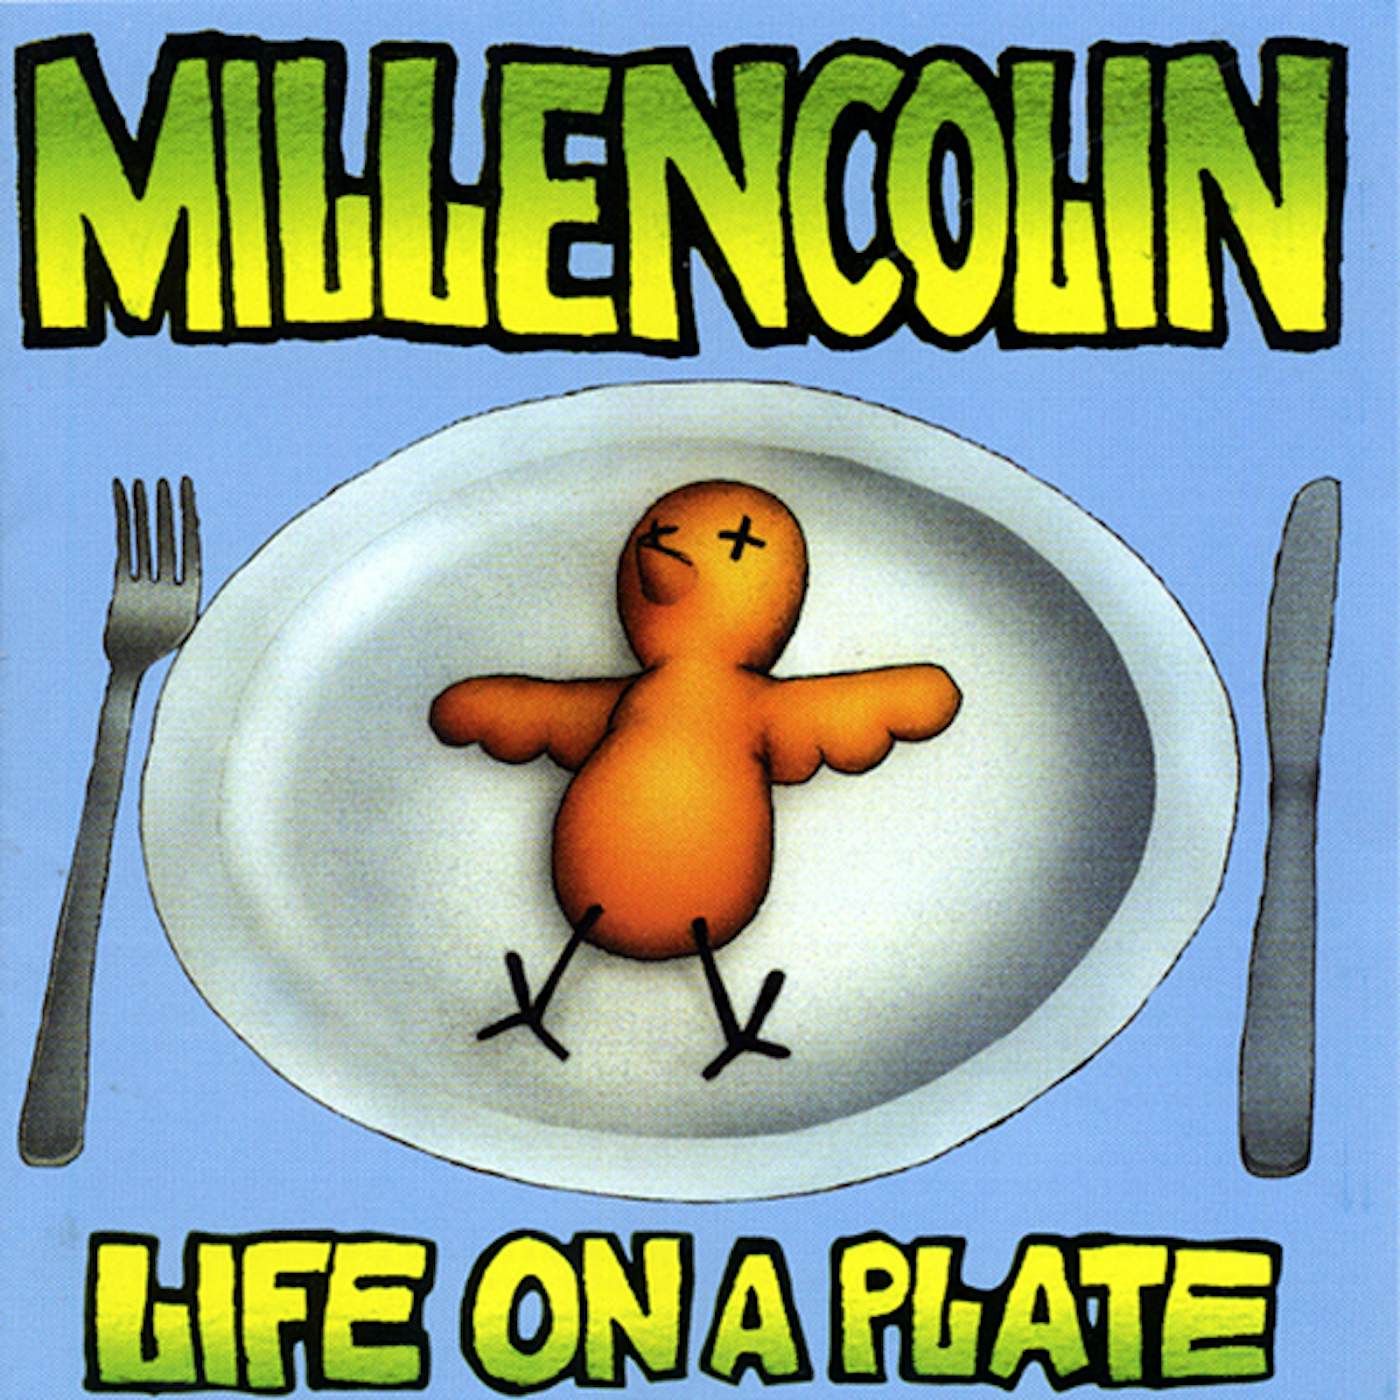 Millencolin Life On A Plate Vinyl Record